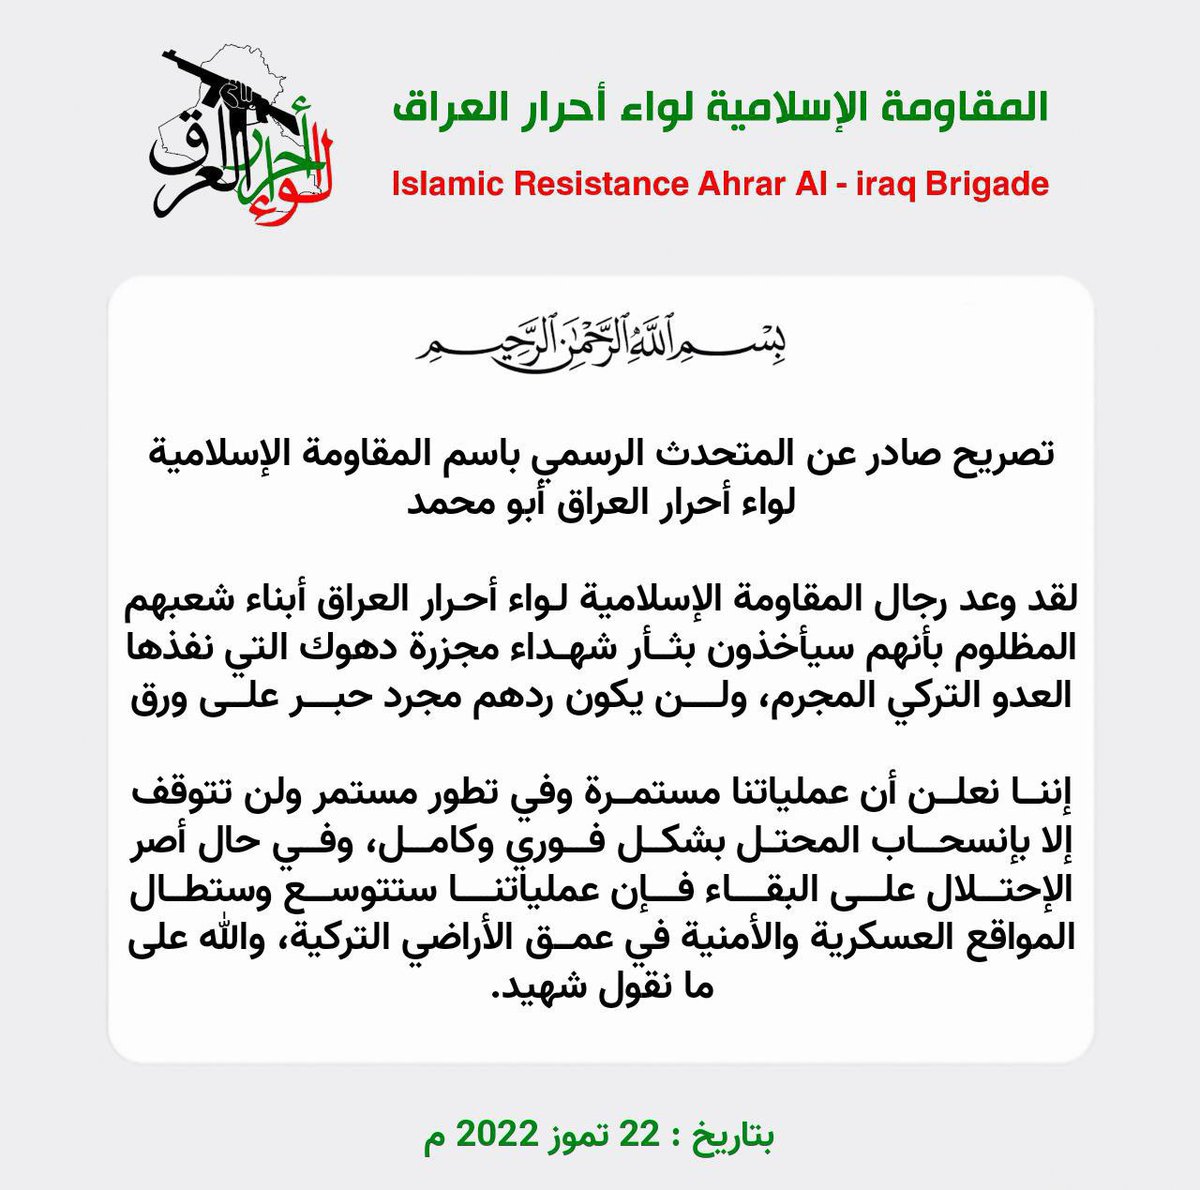 Liwa al-Ahrar has published a statement claiming responsibility for attacking a Turkish base in the Iraqi province of Duhok. The group says it will continue its operations until Turkey withdraws its forces